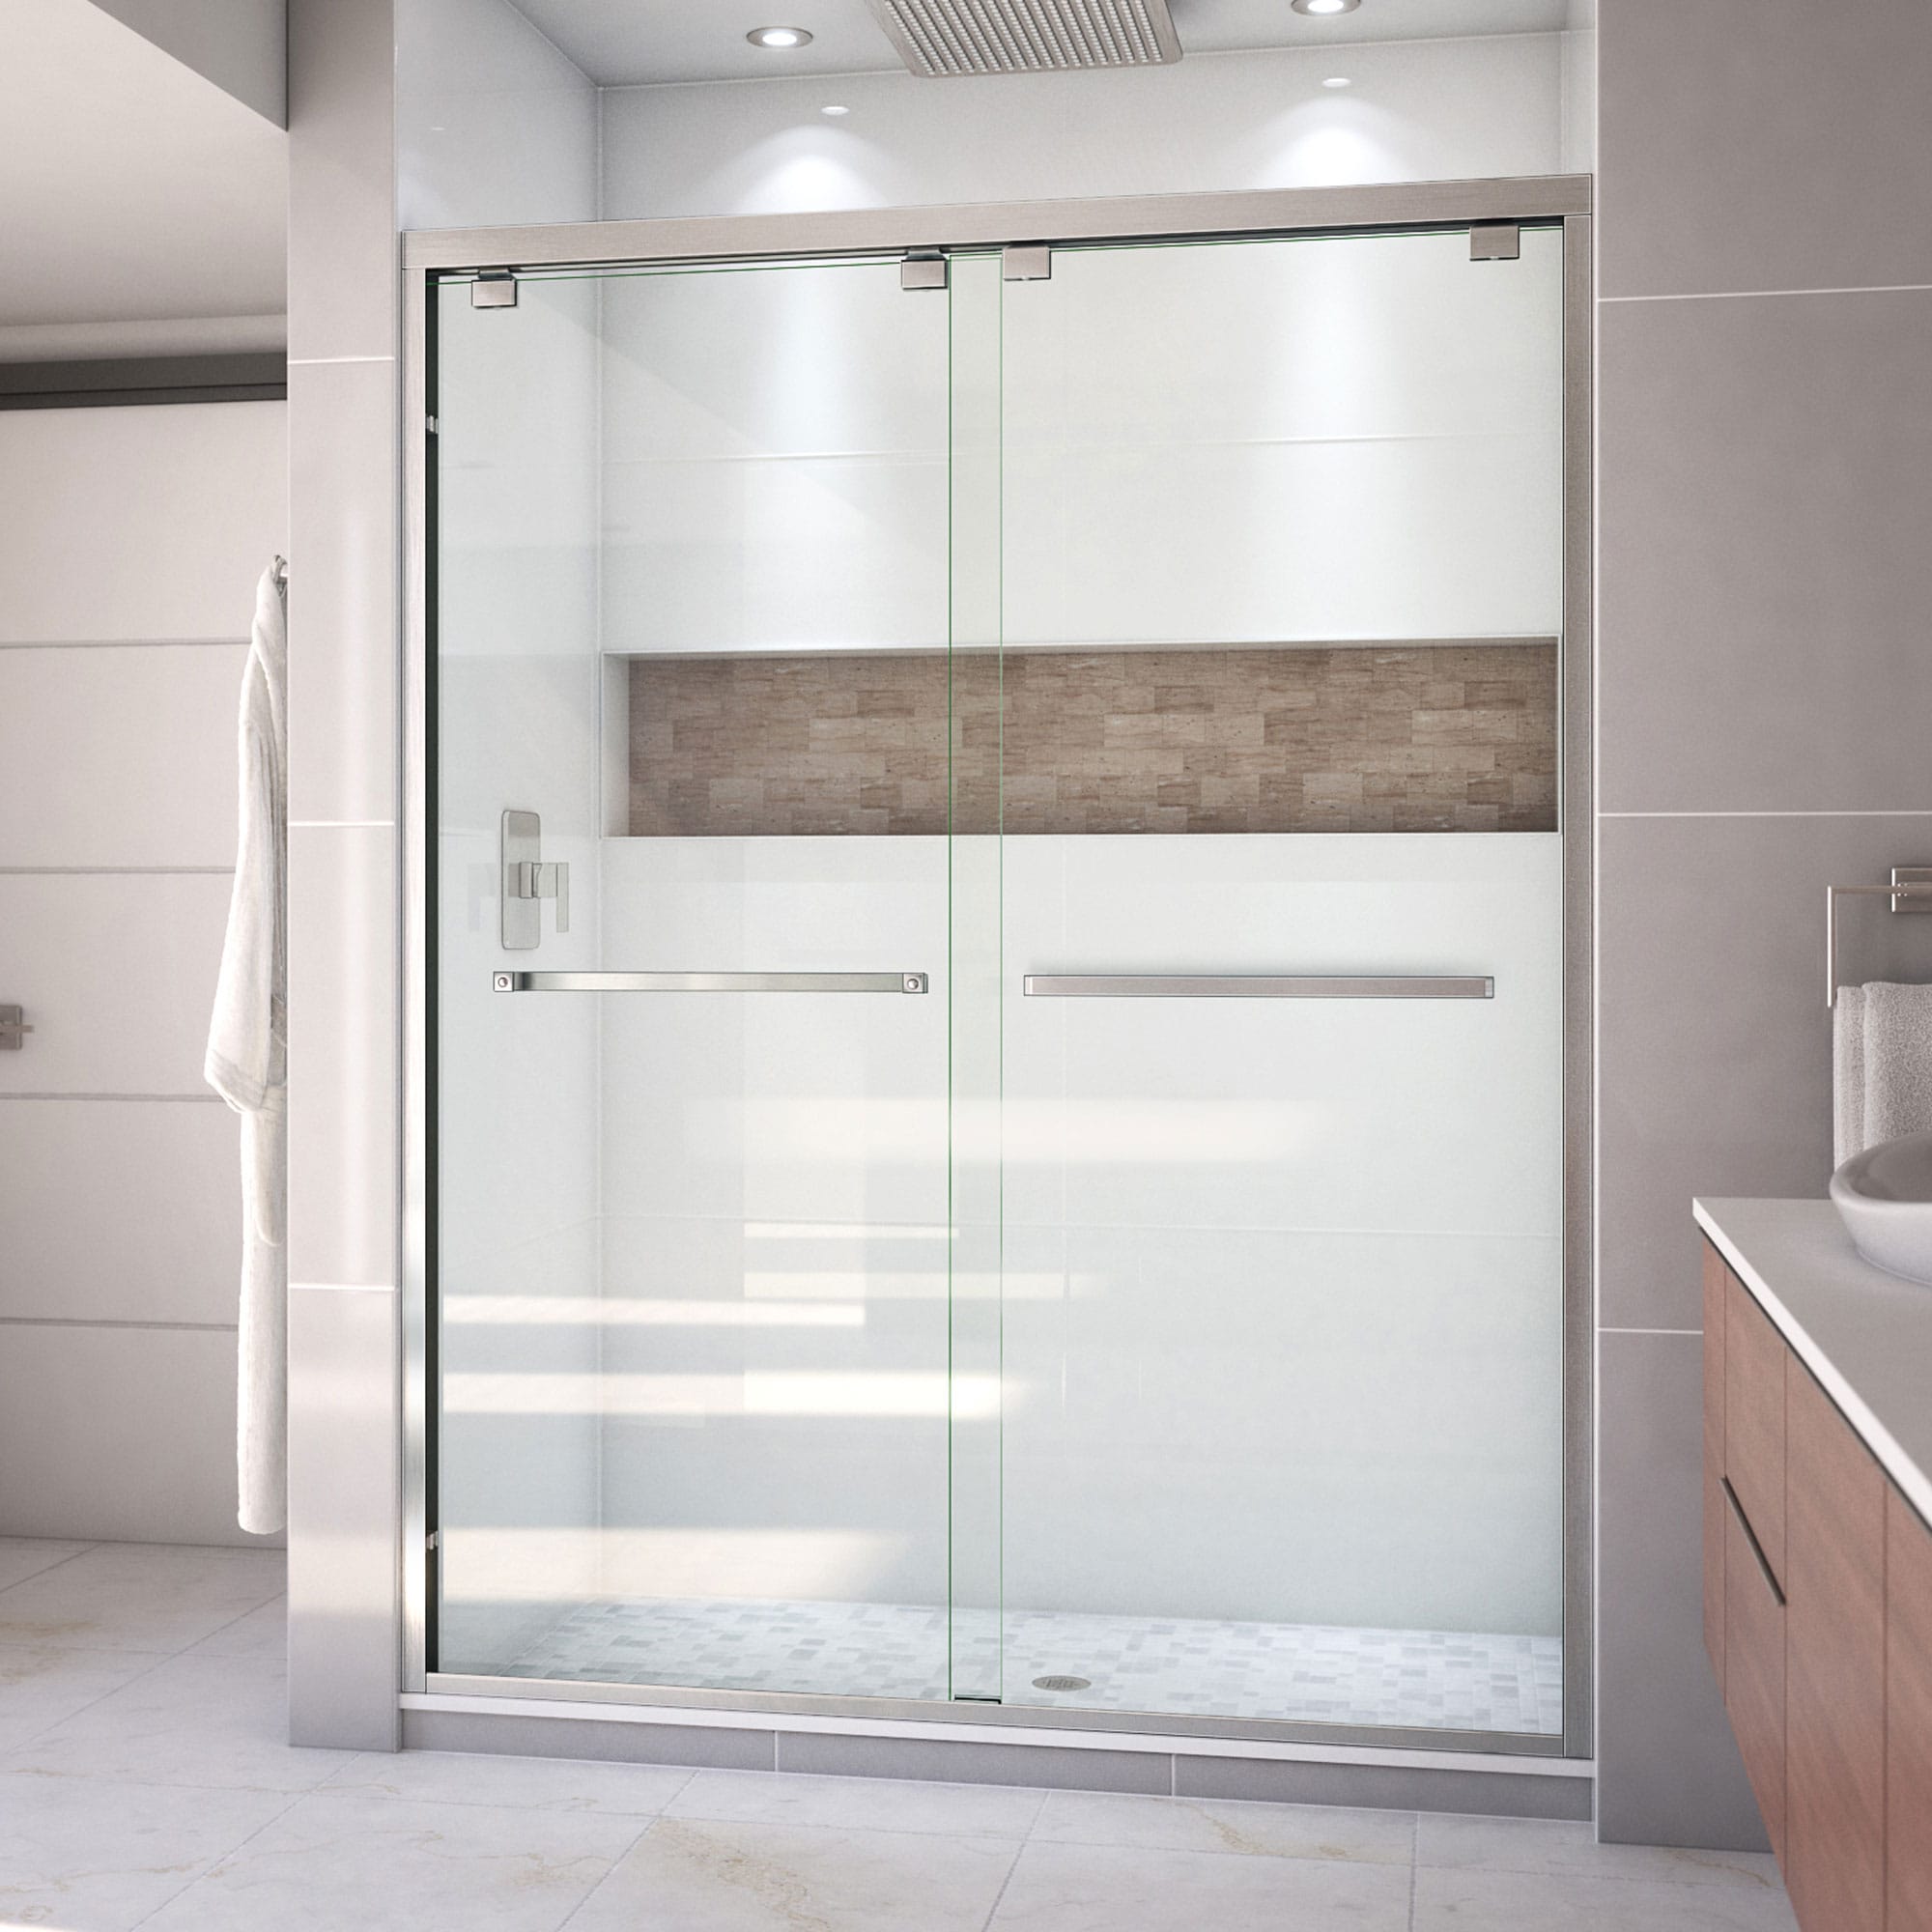 Upgrade Your Bathroom With a Stunning Brushed Nickel Finish Shower Door